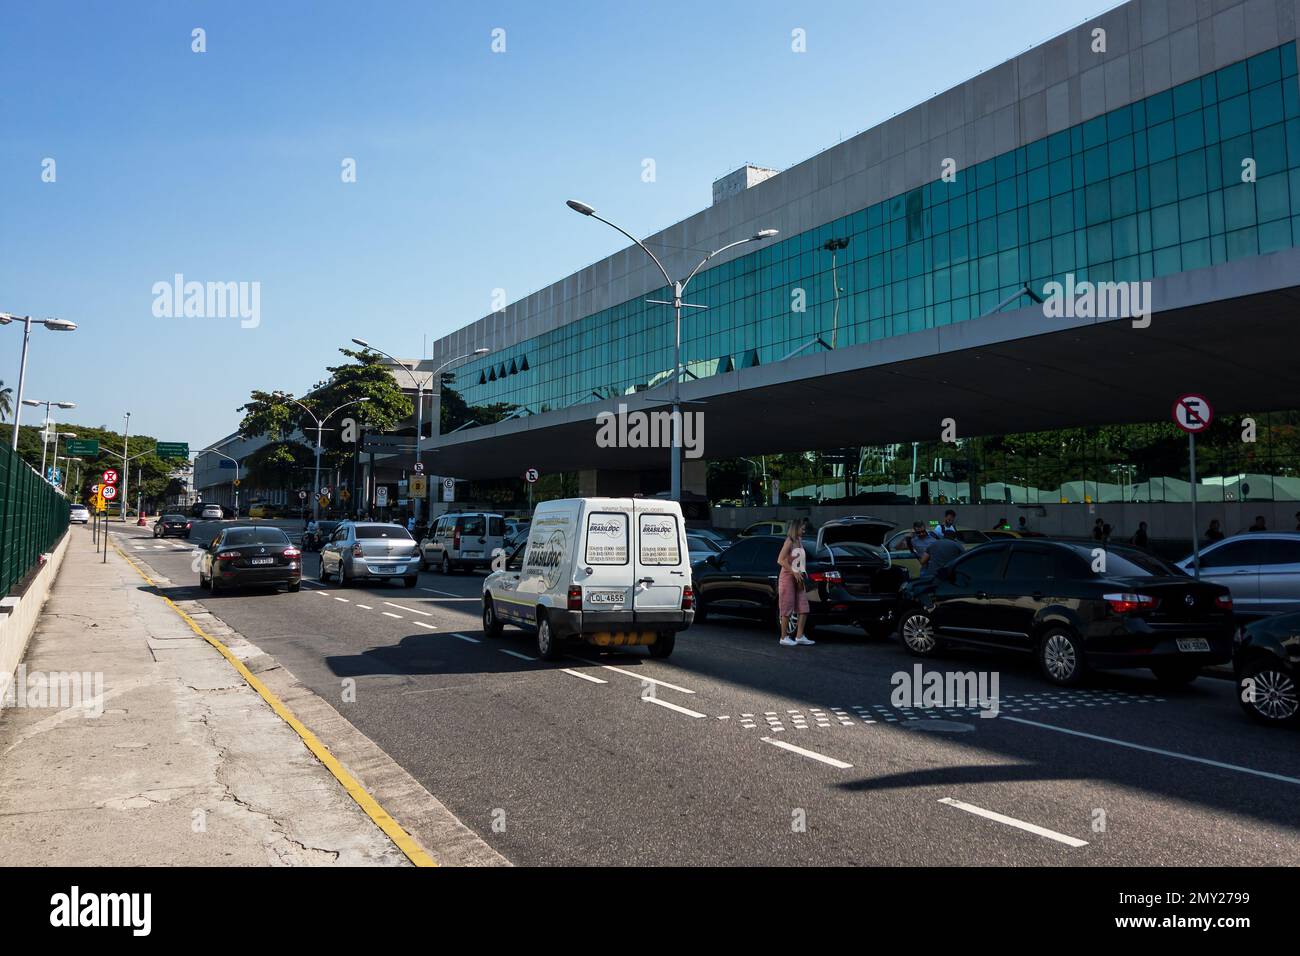 Lots of cars stopped at the populated outdoor departure area of Santos Dumont airport while traffic pass by nearby under summer sunny clear blue sky. Stock Photo